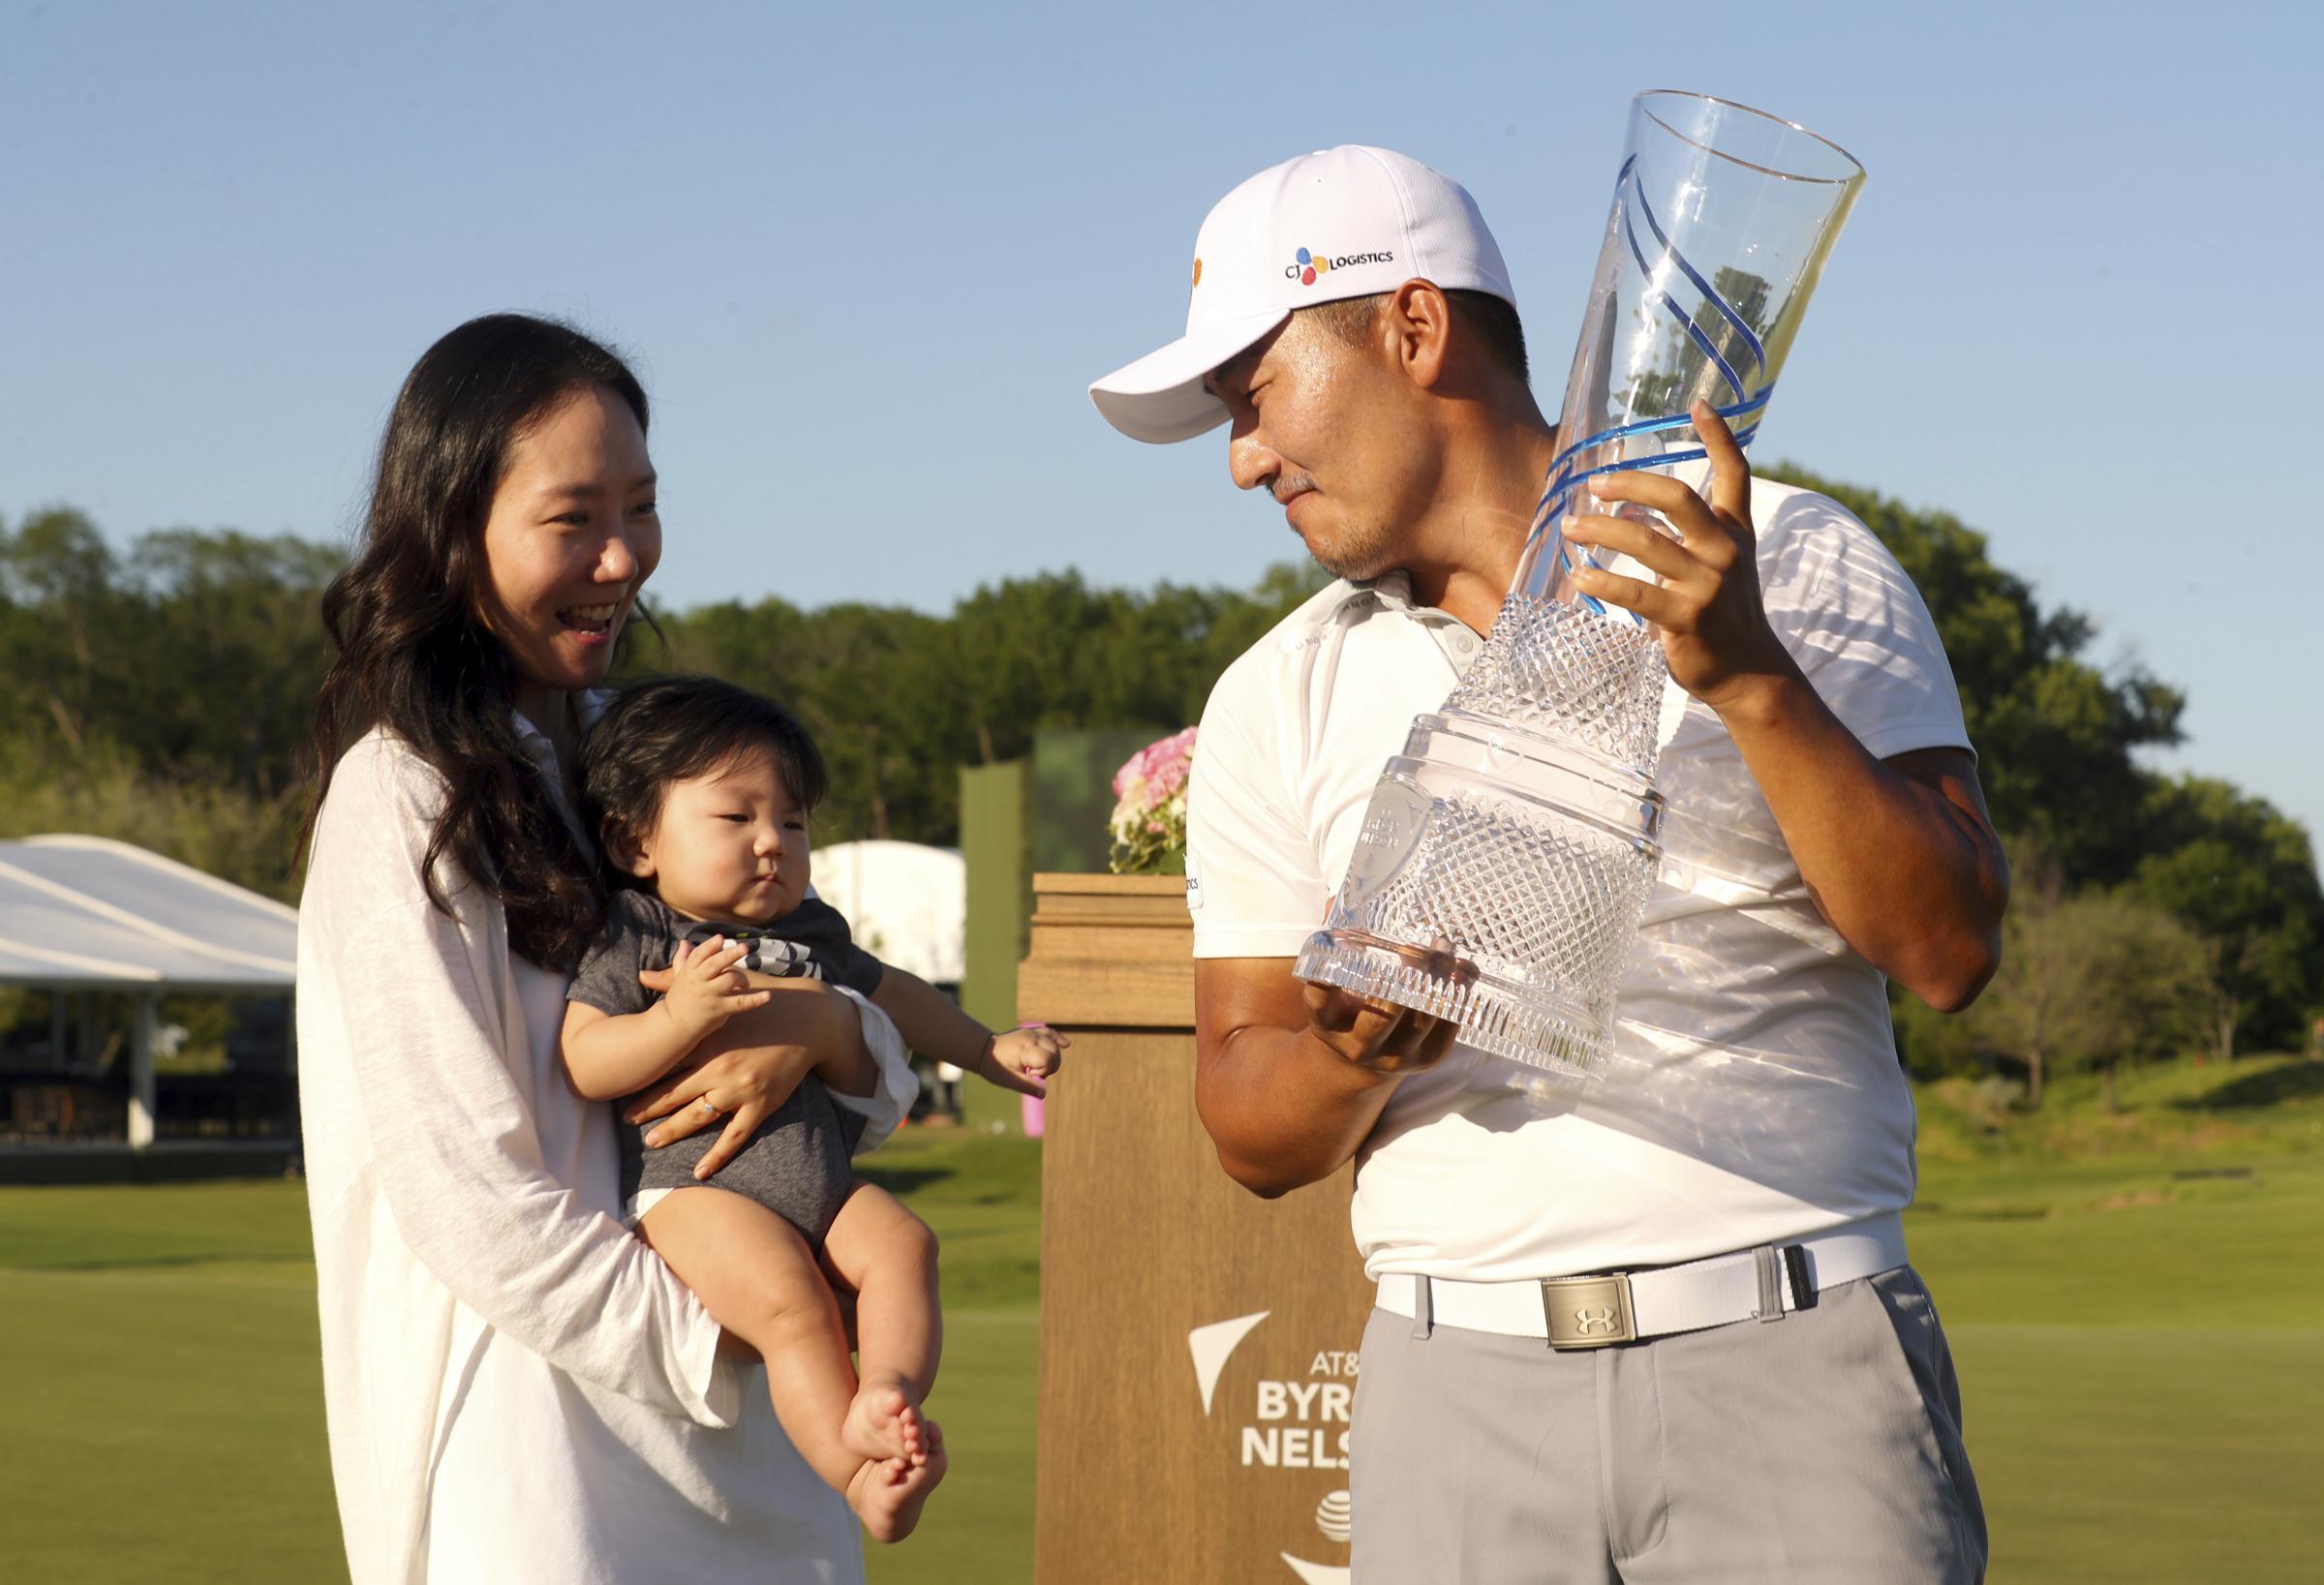 North Texas' Sung Kang Wins Byron Nelson For 1st PGA Tour ...